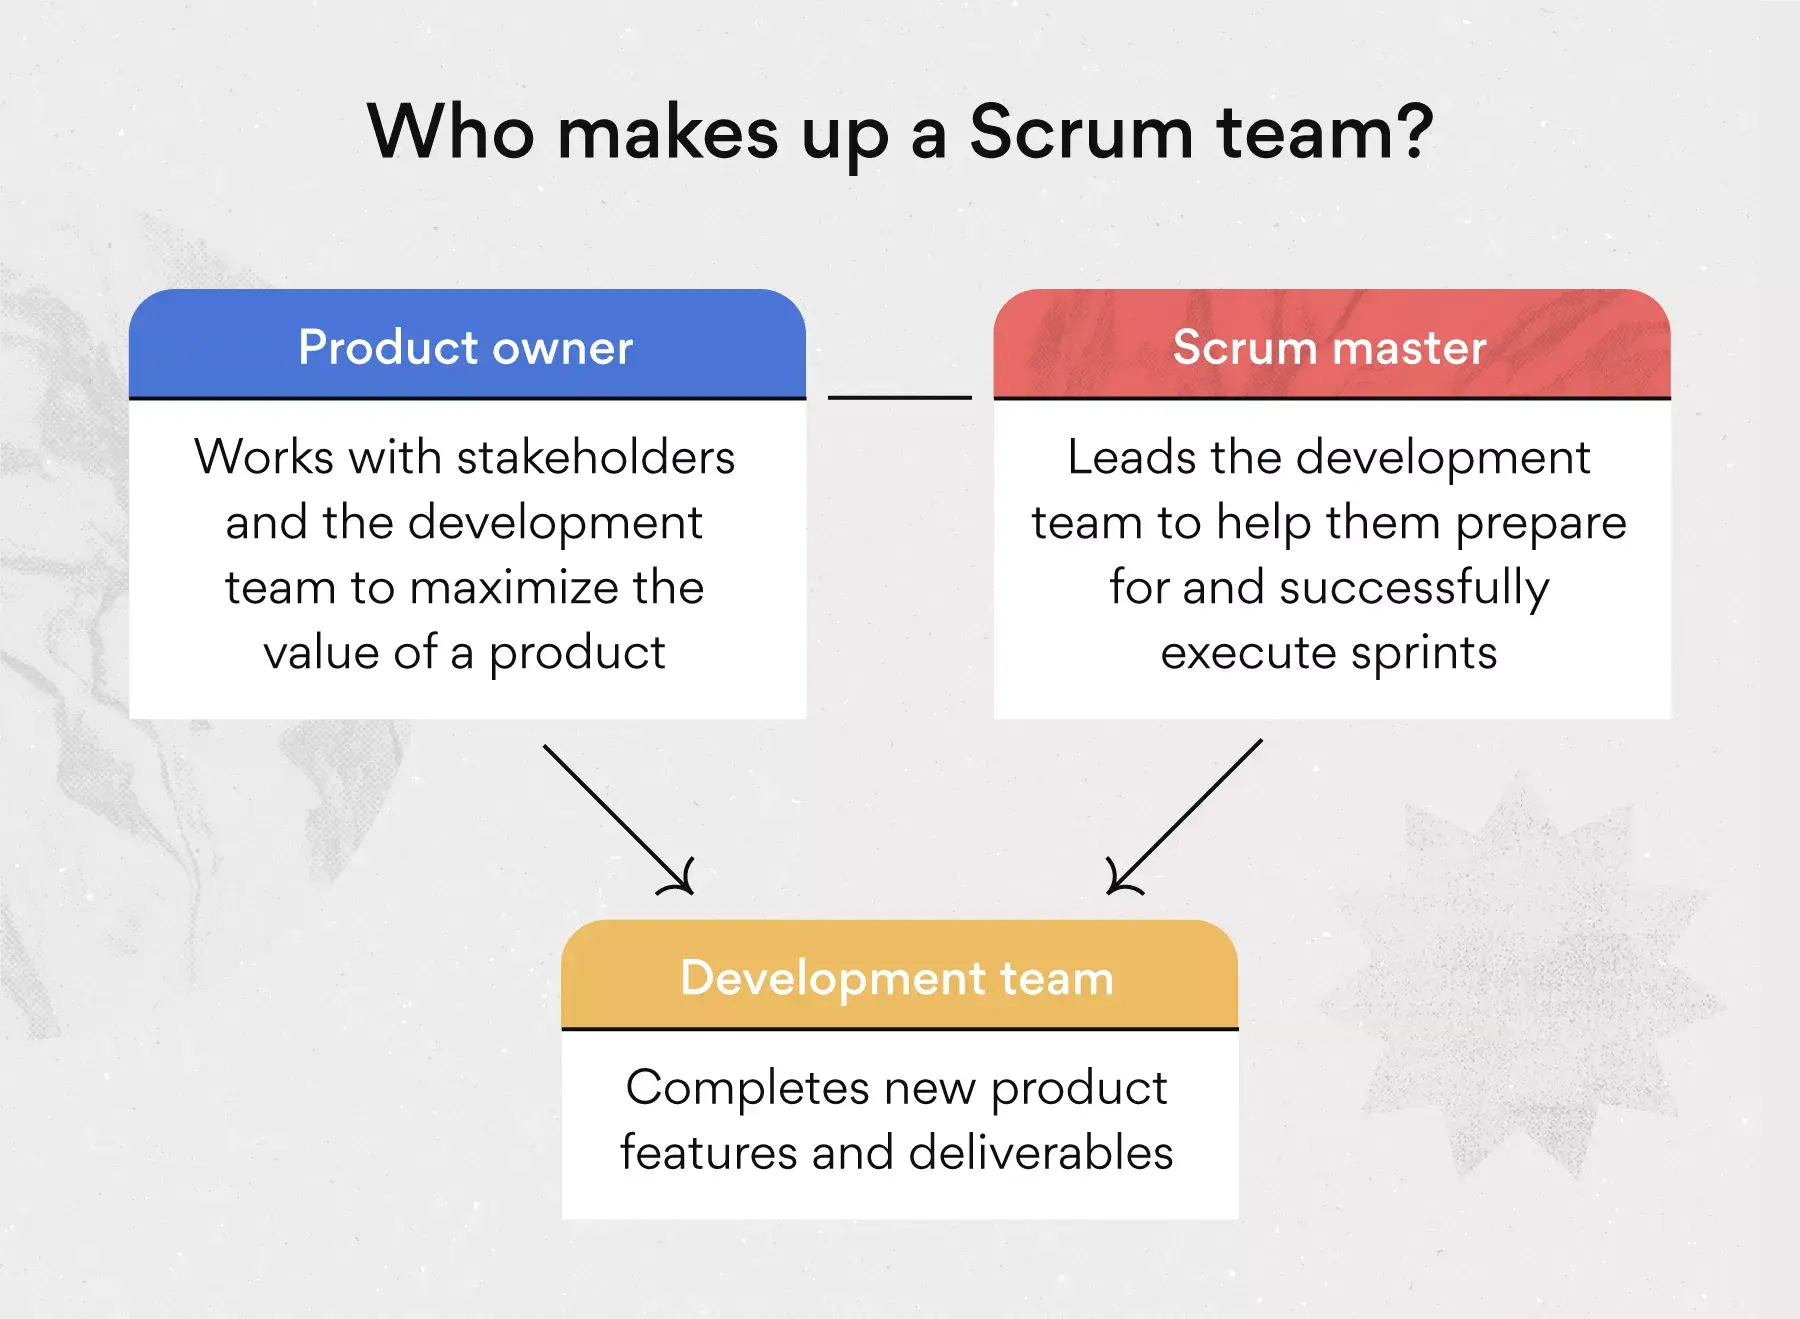 [inline illustration] What makes up a Scrum team? (infographic)